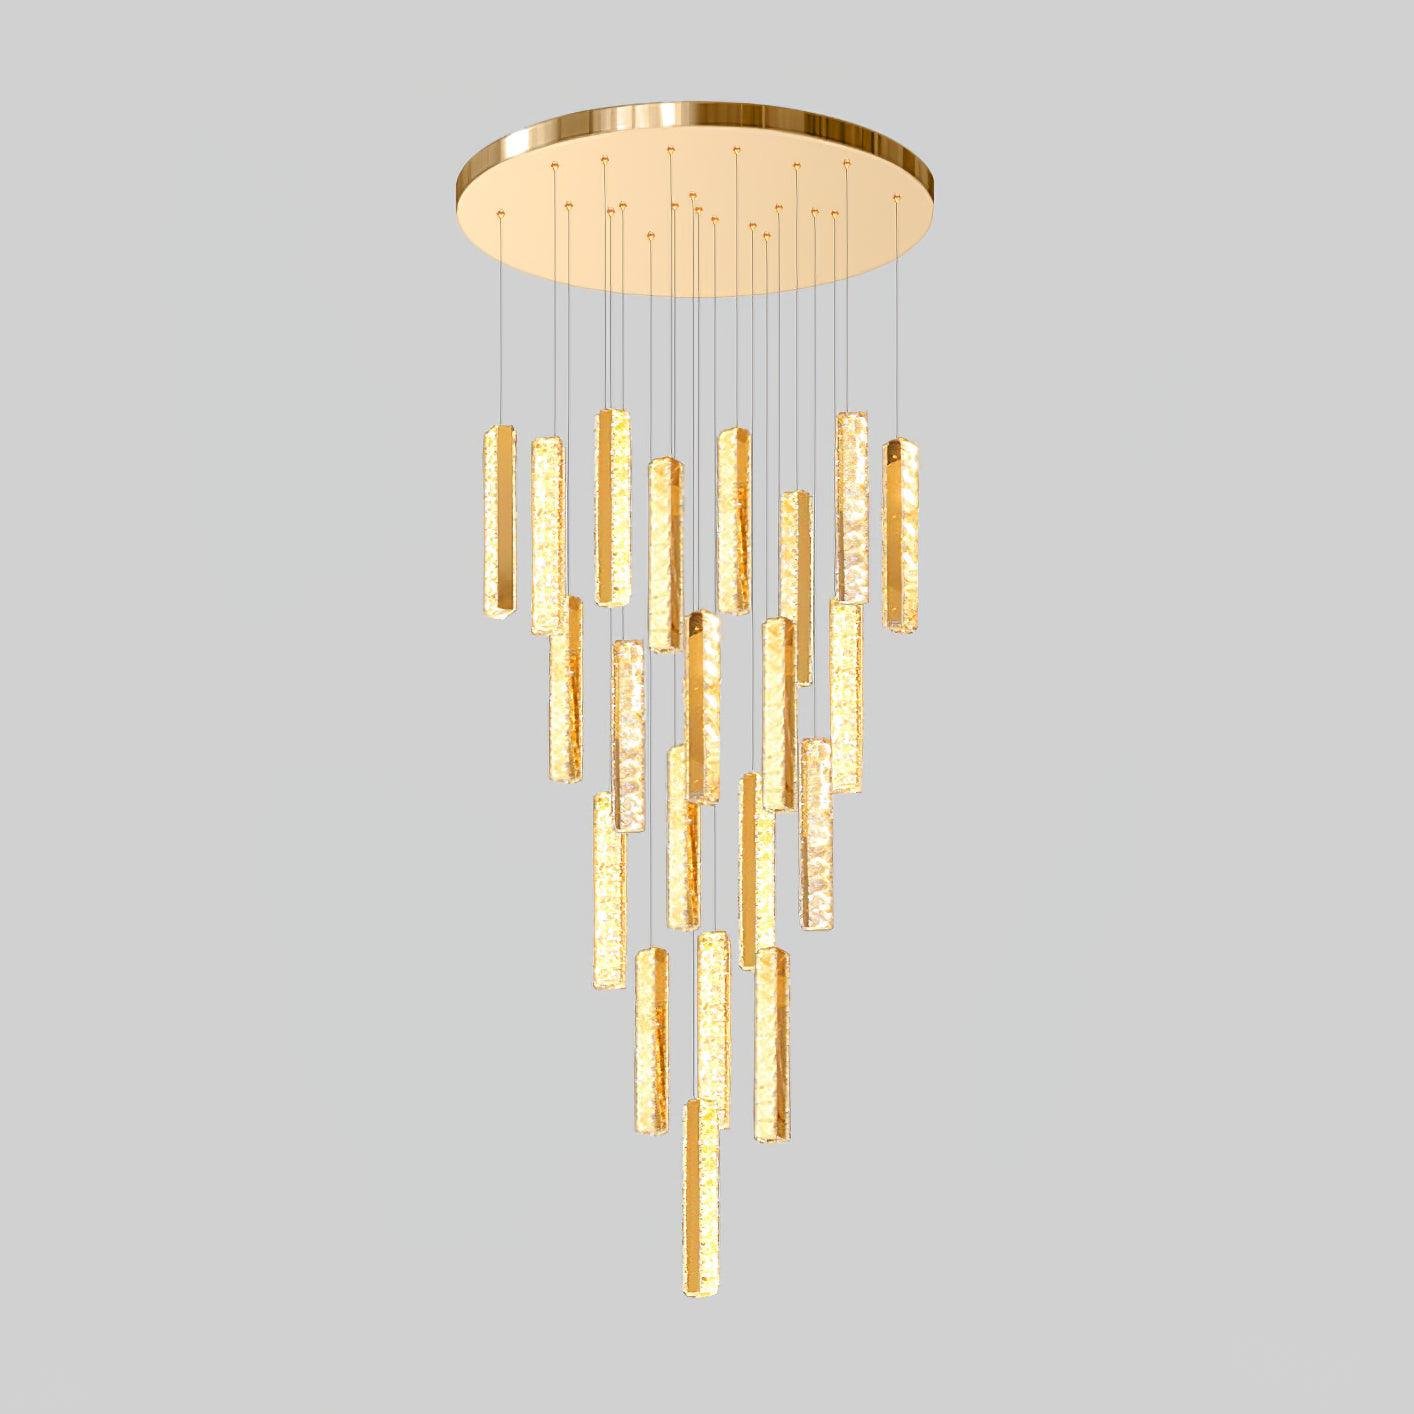 Chandelier with 21 heads, measuring ∅ 23.6″ x H 118″ (Dia 60cm x H 300cm), in Gold+Clear finish, featuring Bi-color and Multicolor LED options - Villa Forci